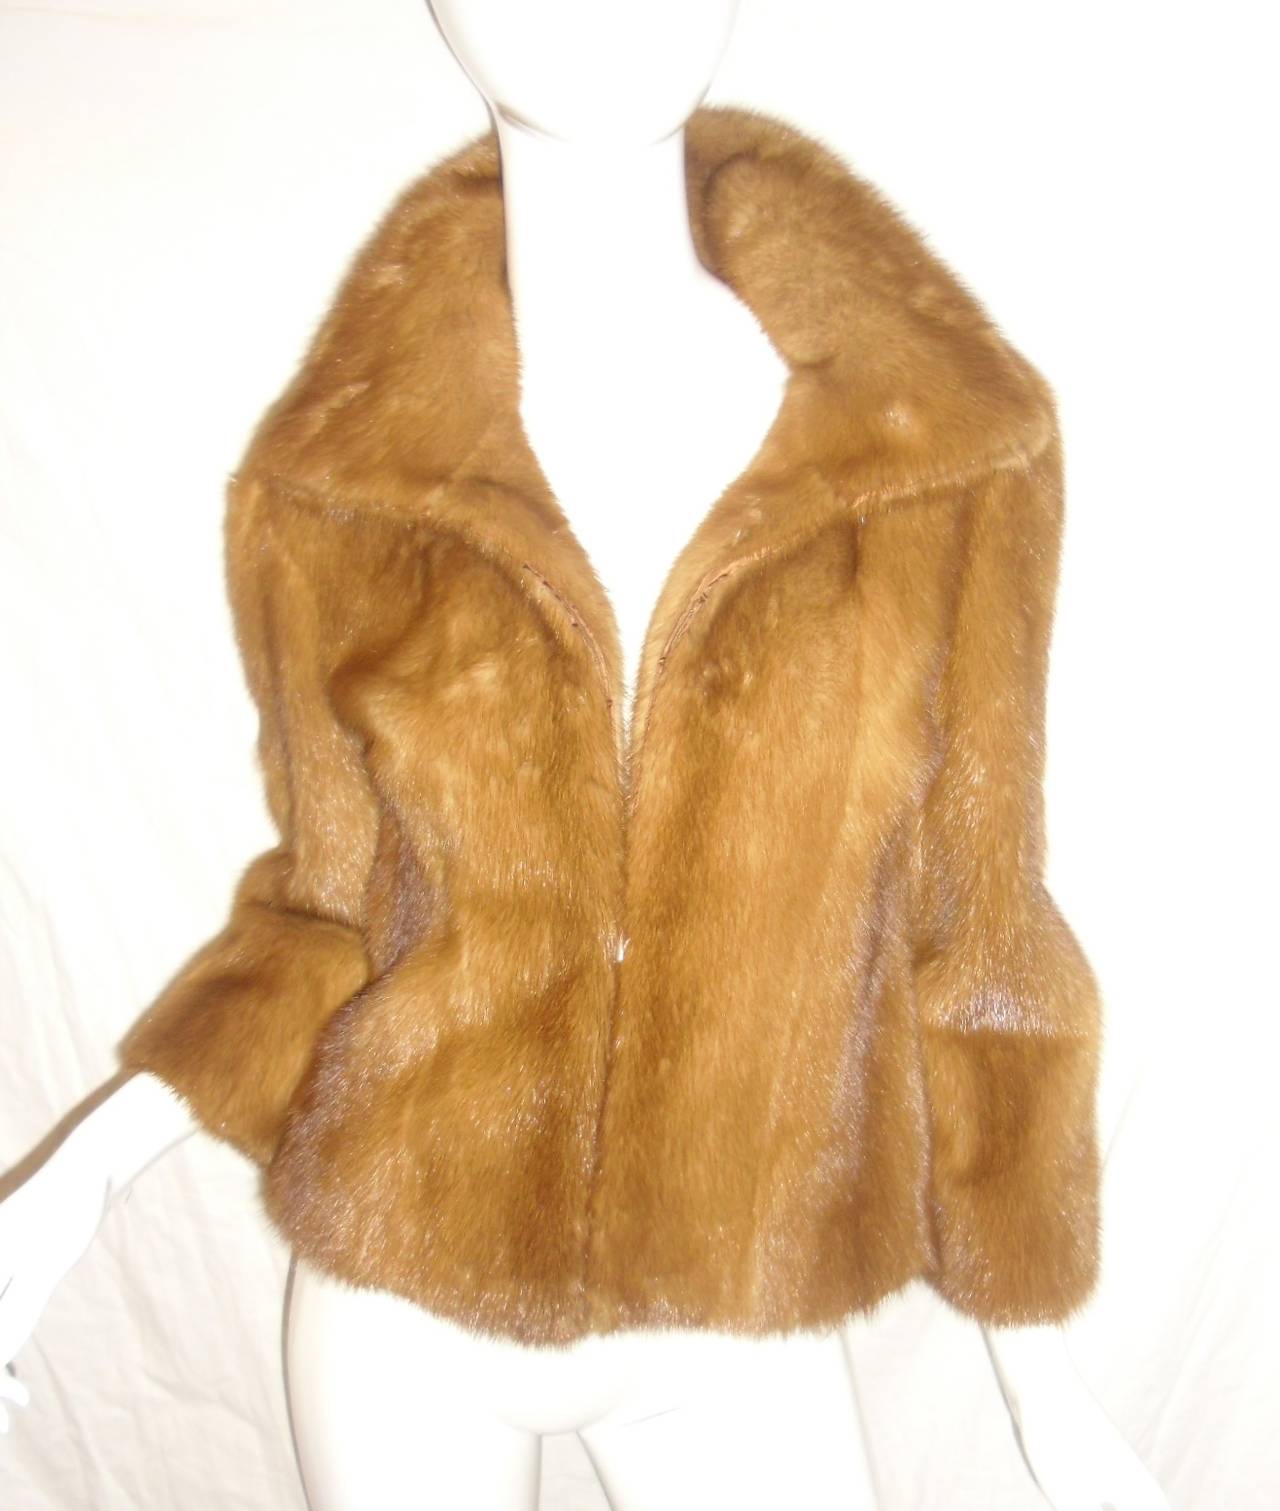 Dolce & Gabbana Cognac Mink Fur Jacket Coat Leopard Lining In Excellent Condition For Sale In New York, NY